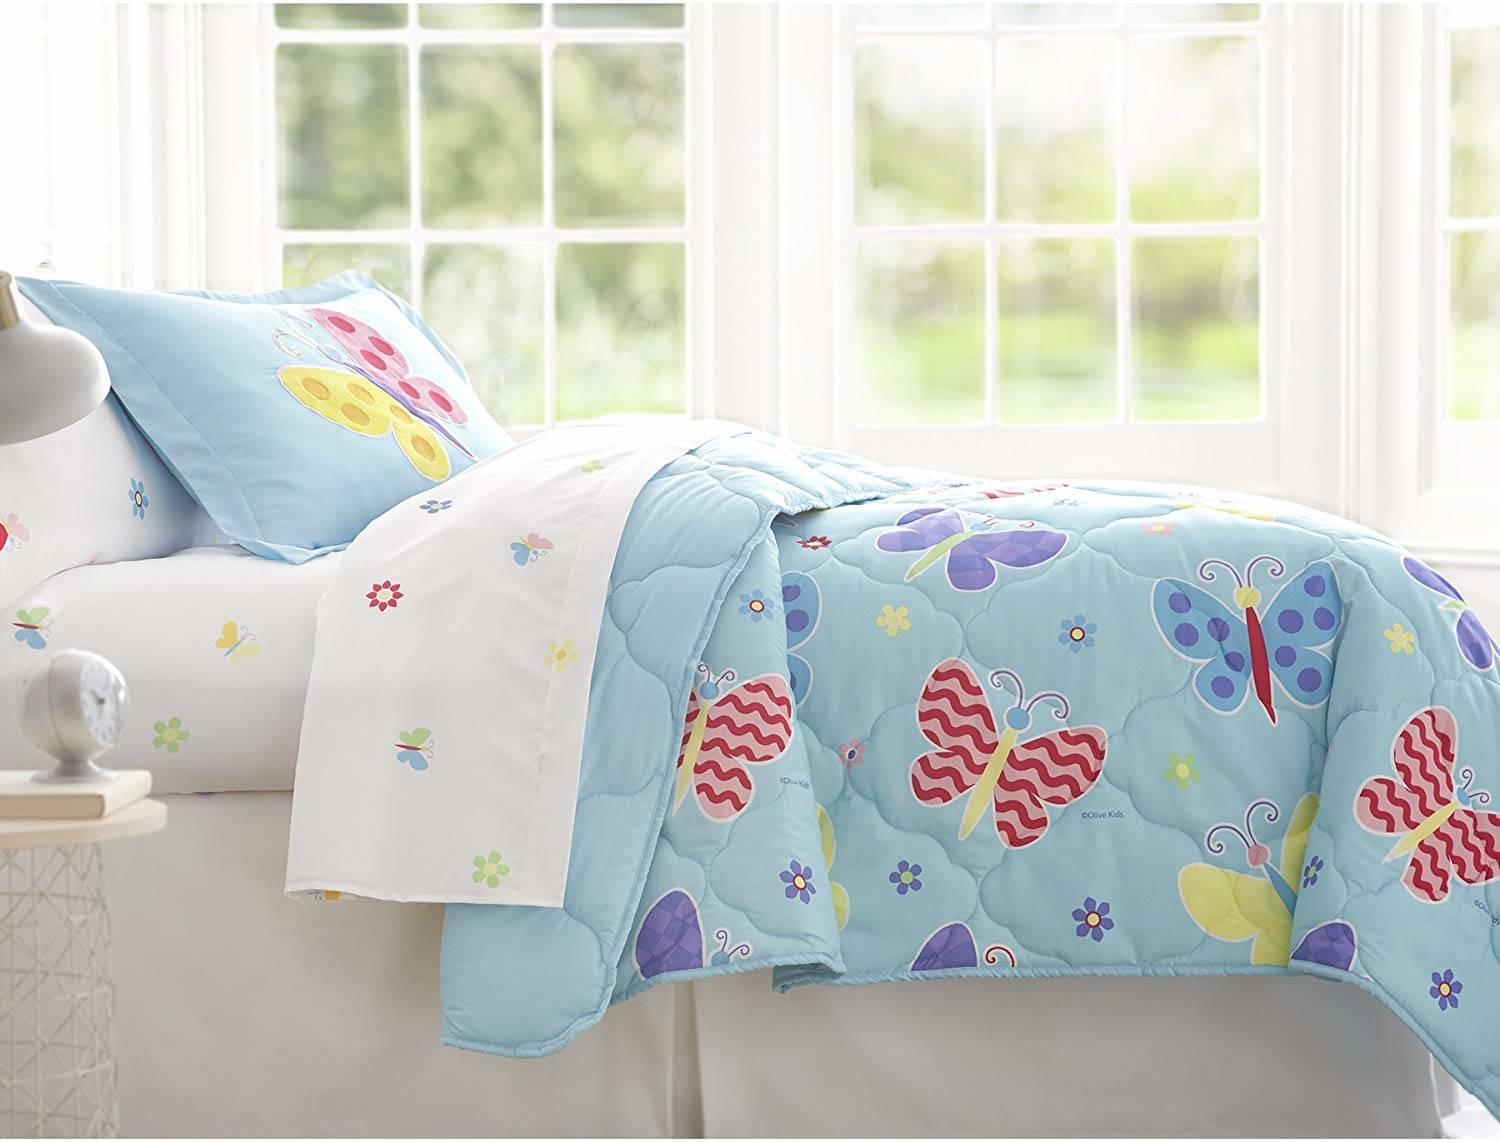 Best Bedding Sets For Kids Reviews 2021 The Sleep Judge